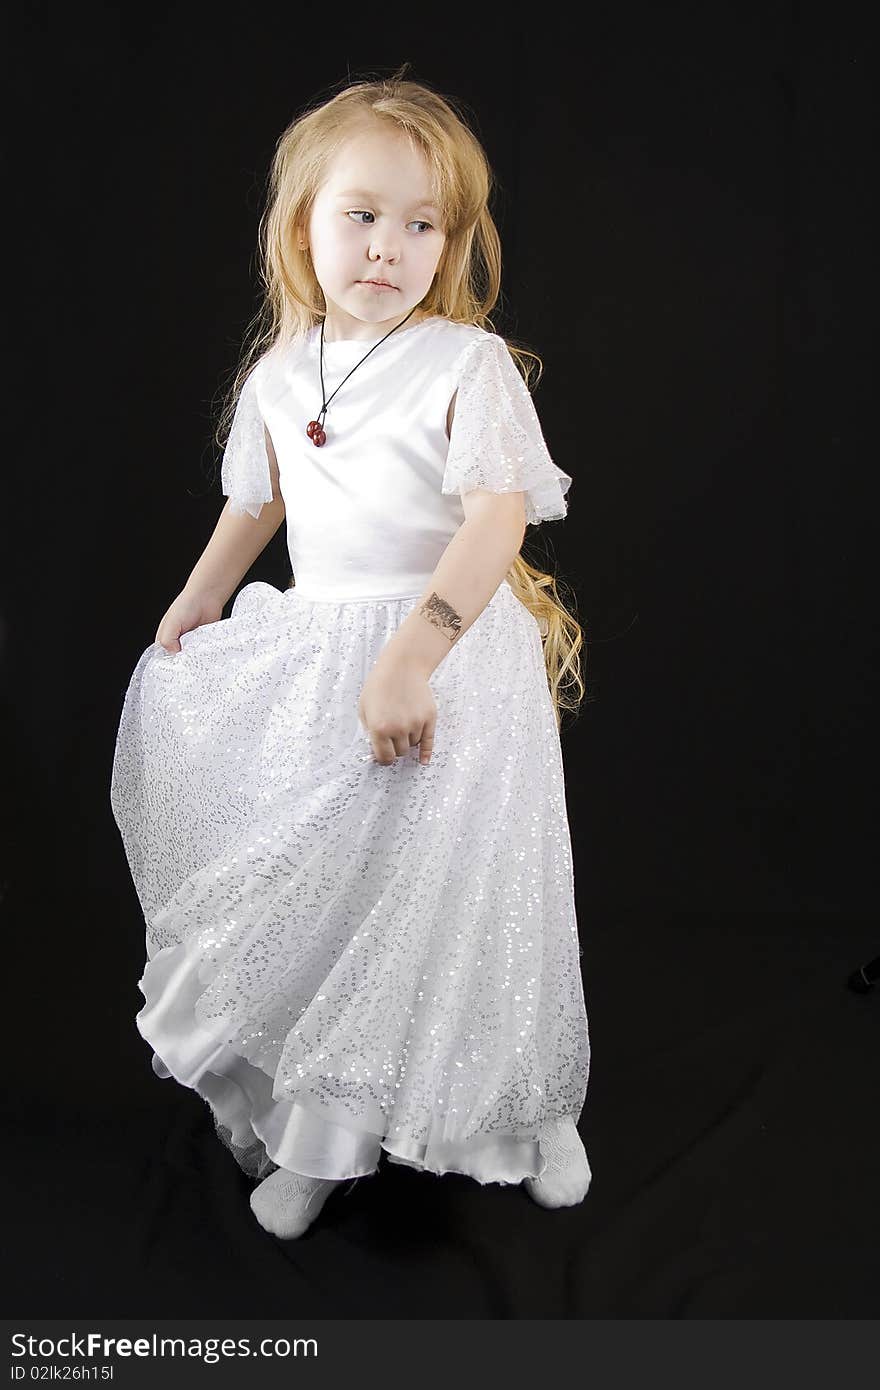 The girl the princess in a white dress standing opposite to a black background. The girl the princess in a white dress standing opposite to a black background